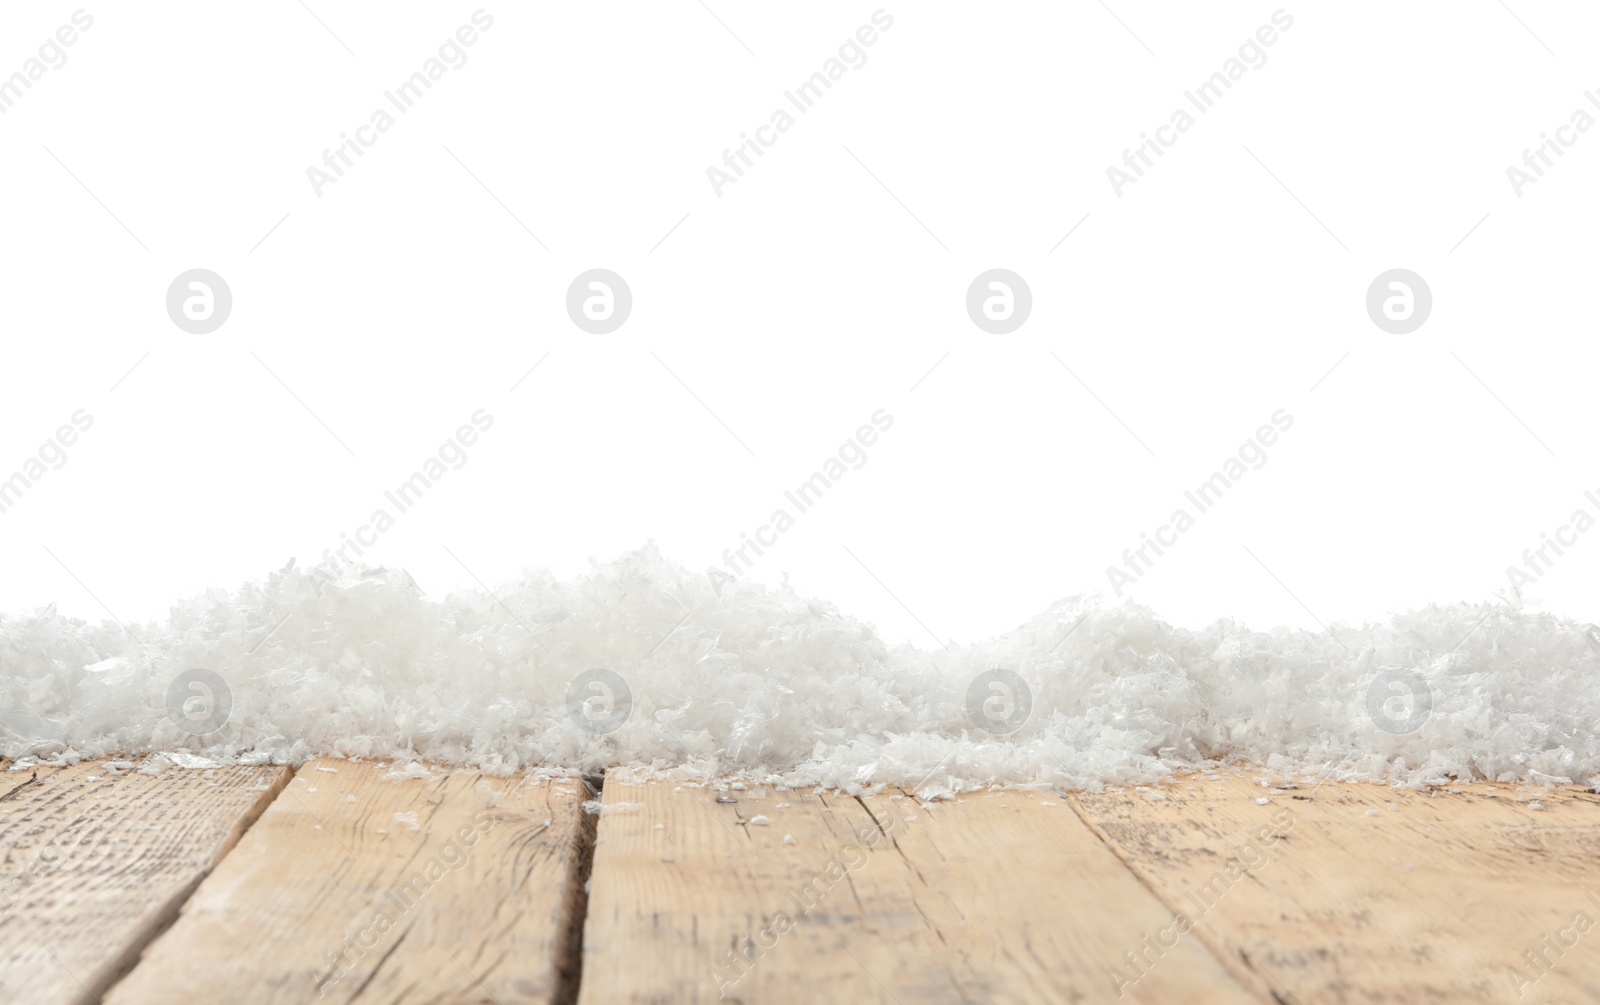 Photo of Snow on wooden surface against white background. Christmas season